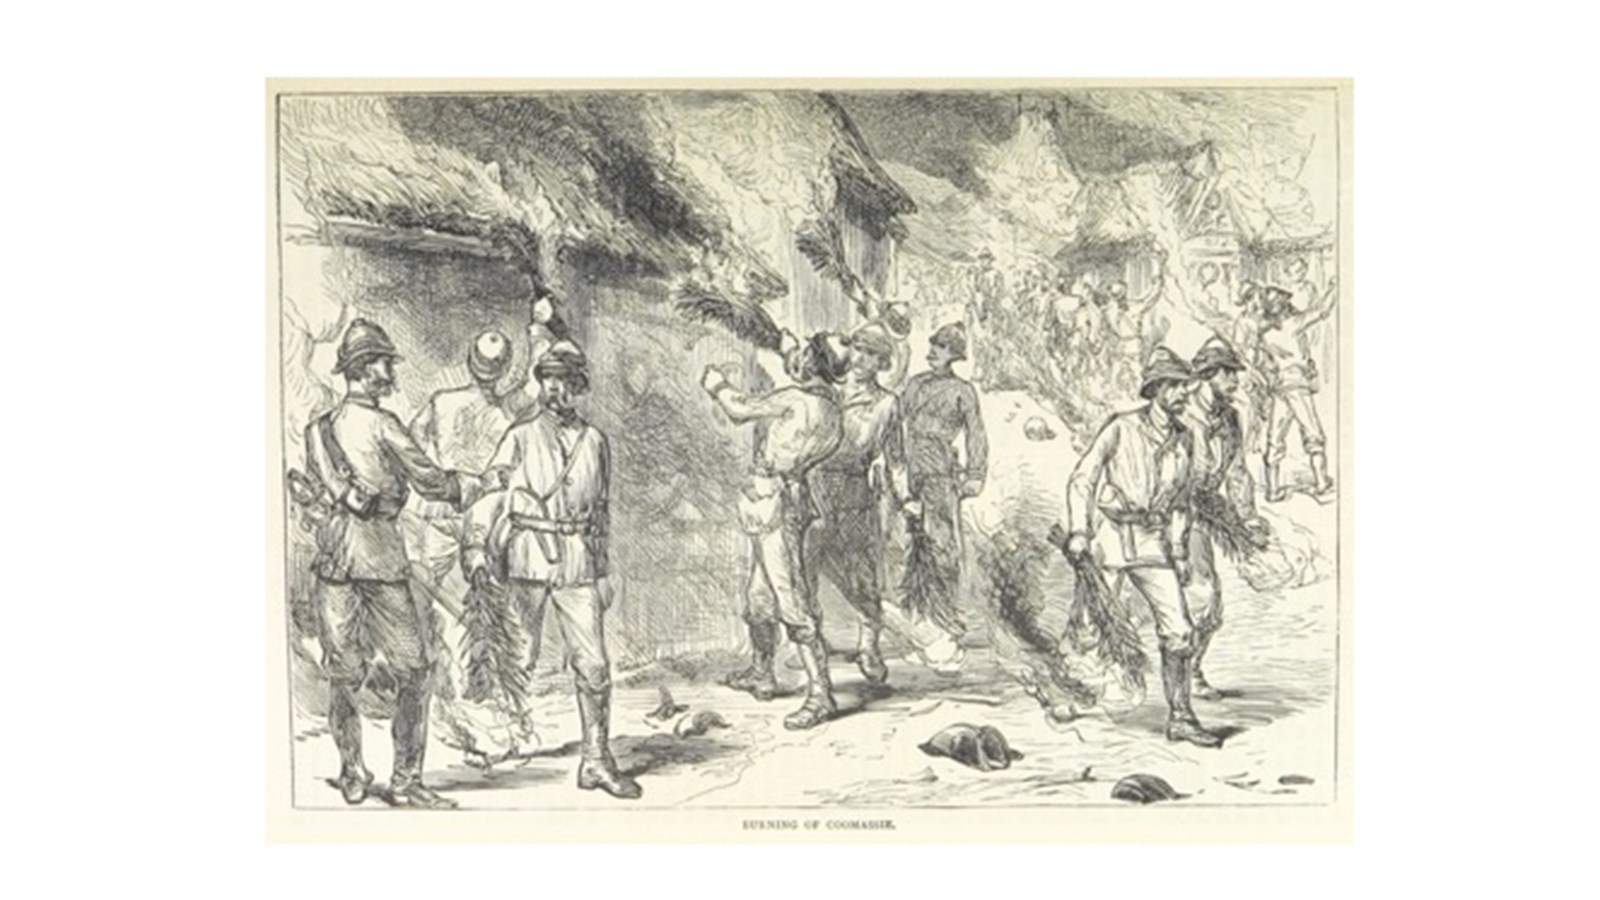 a pencil sketch of a group of people who appear to be soldiers among some thatched roof huts.